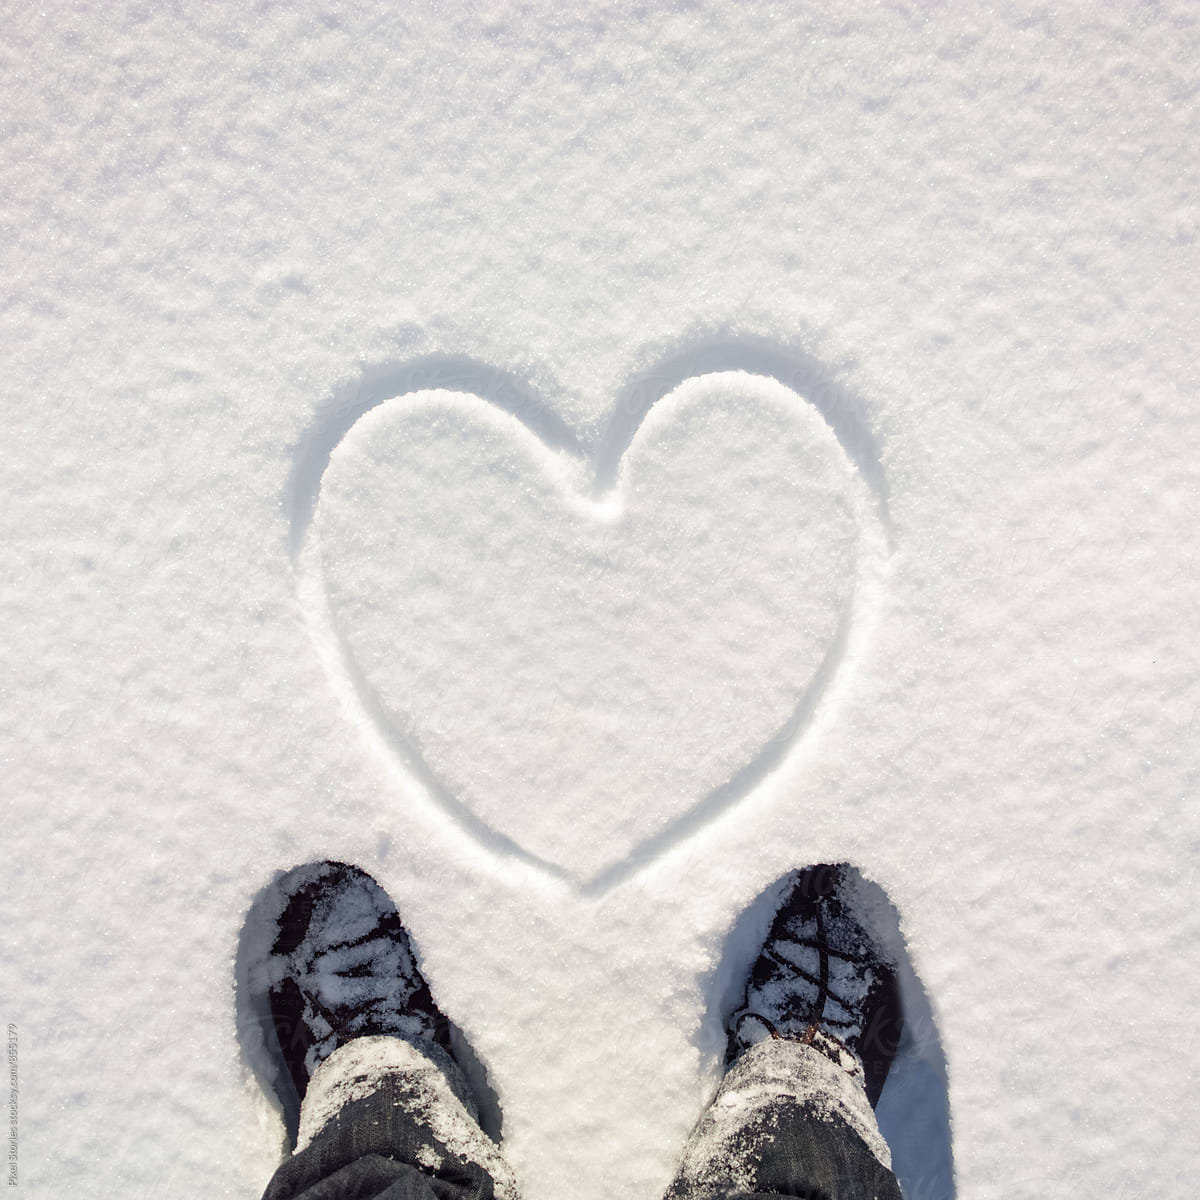 Person standing in front of snow heart